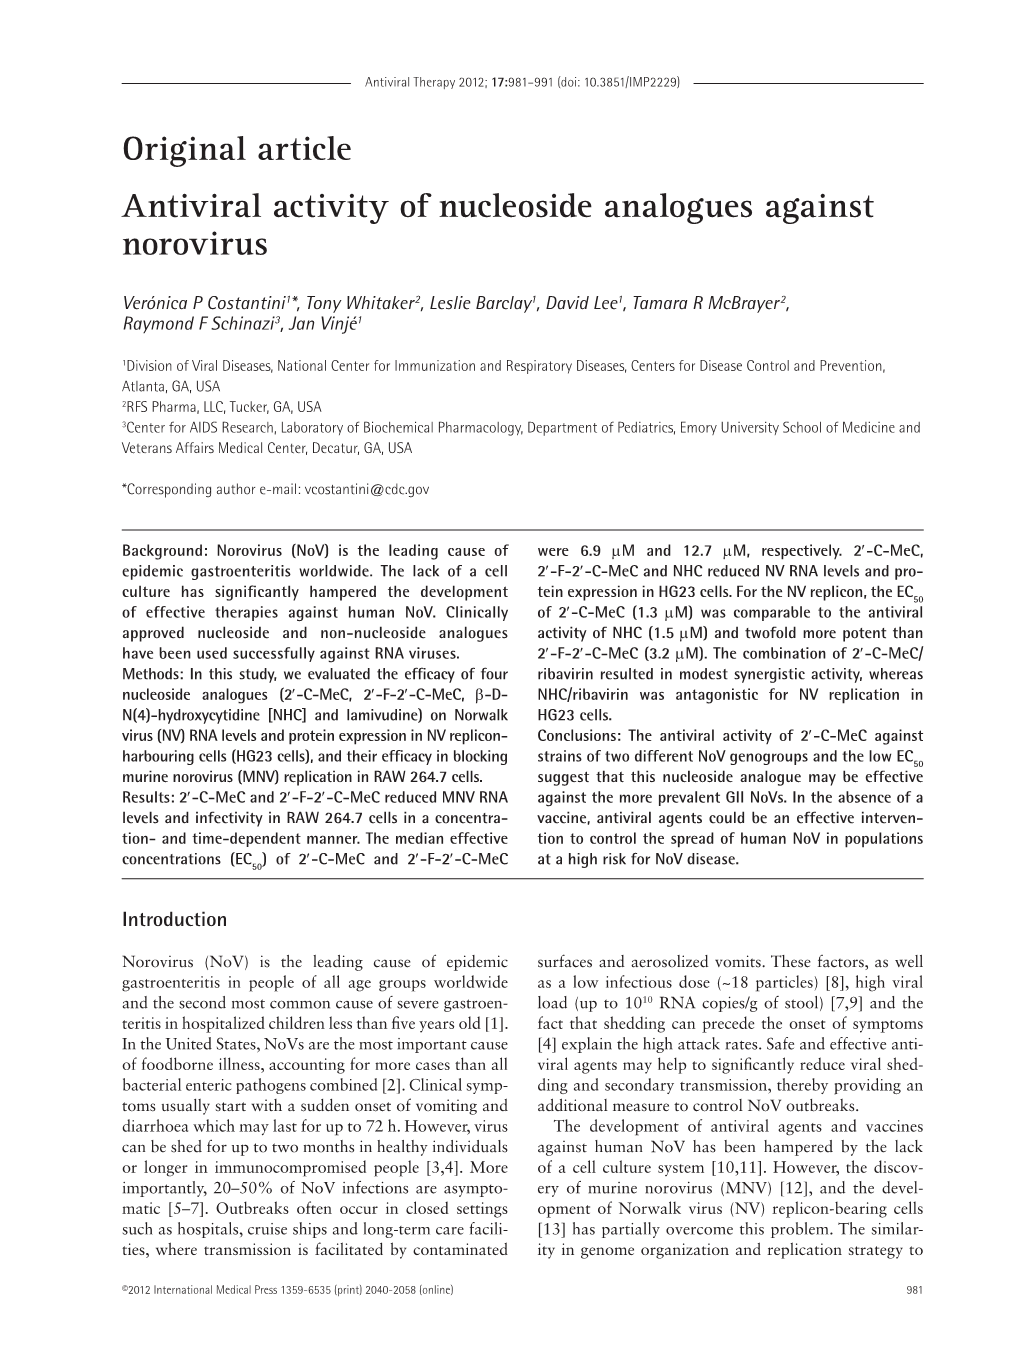 Original Article Antiviral Activity of Nucleoside Analogues Against Norovirus